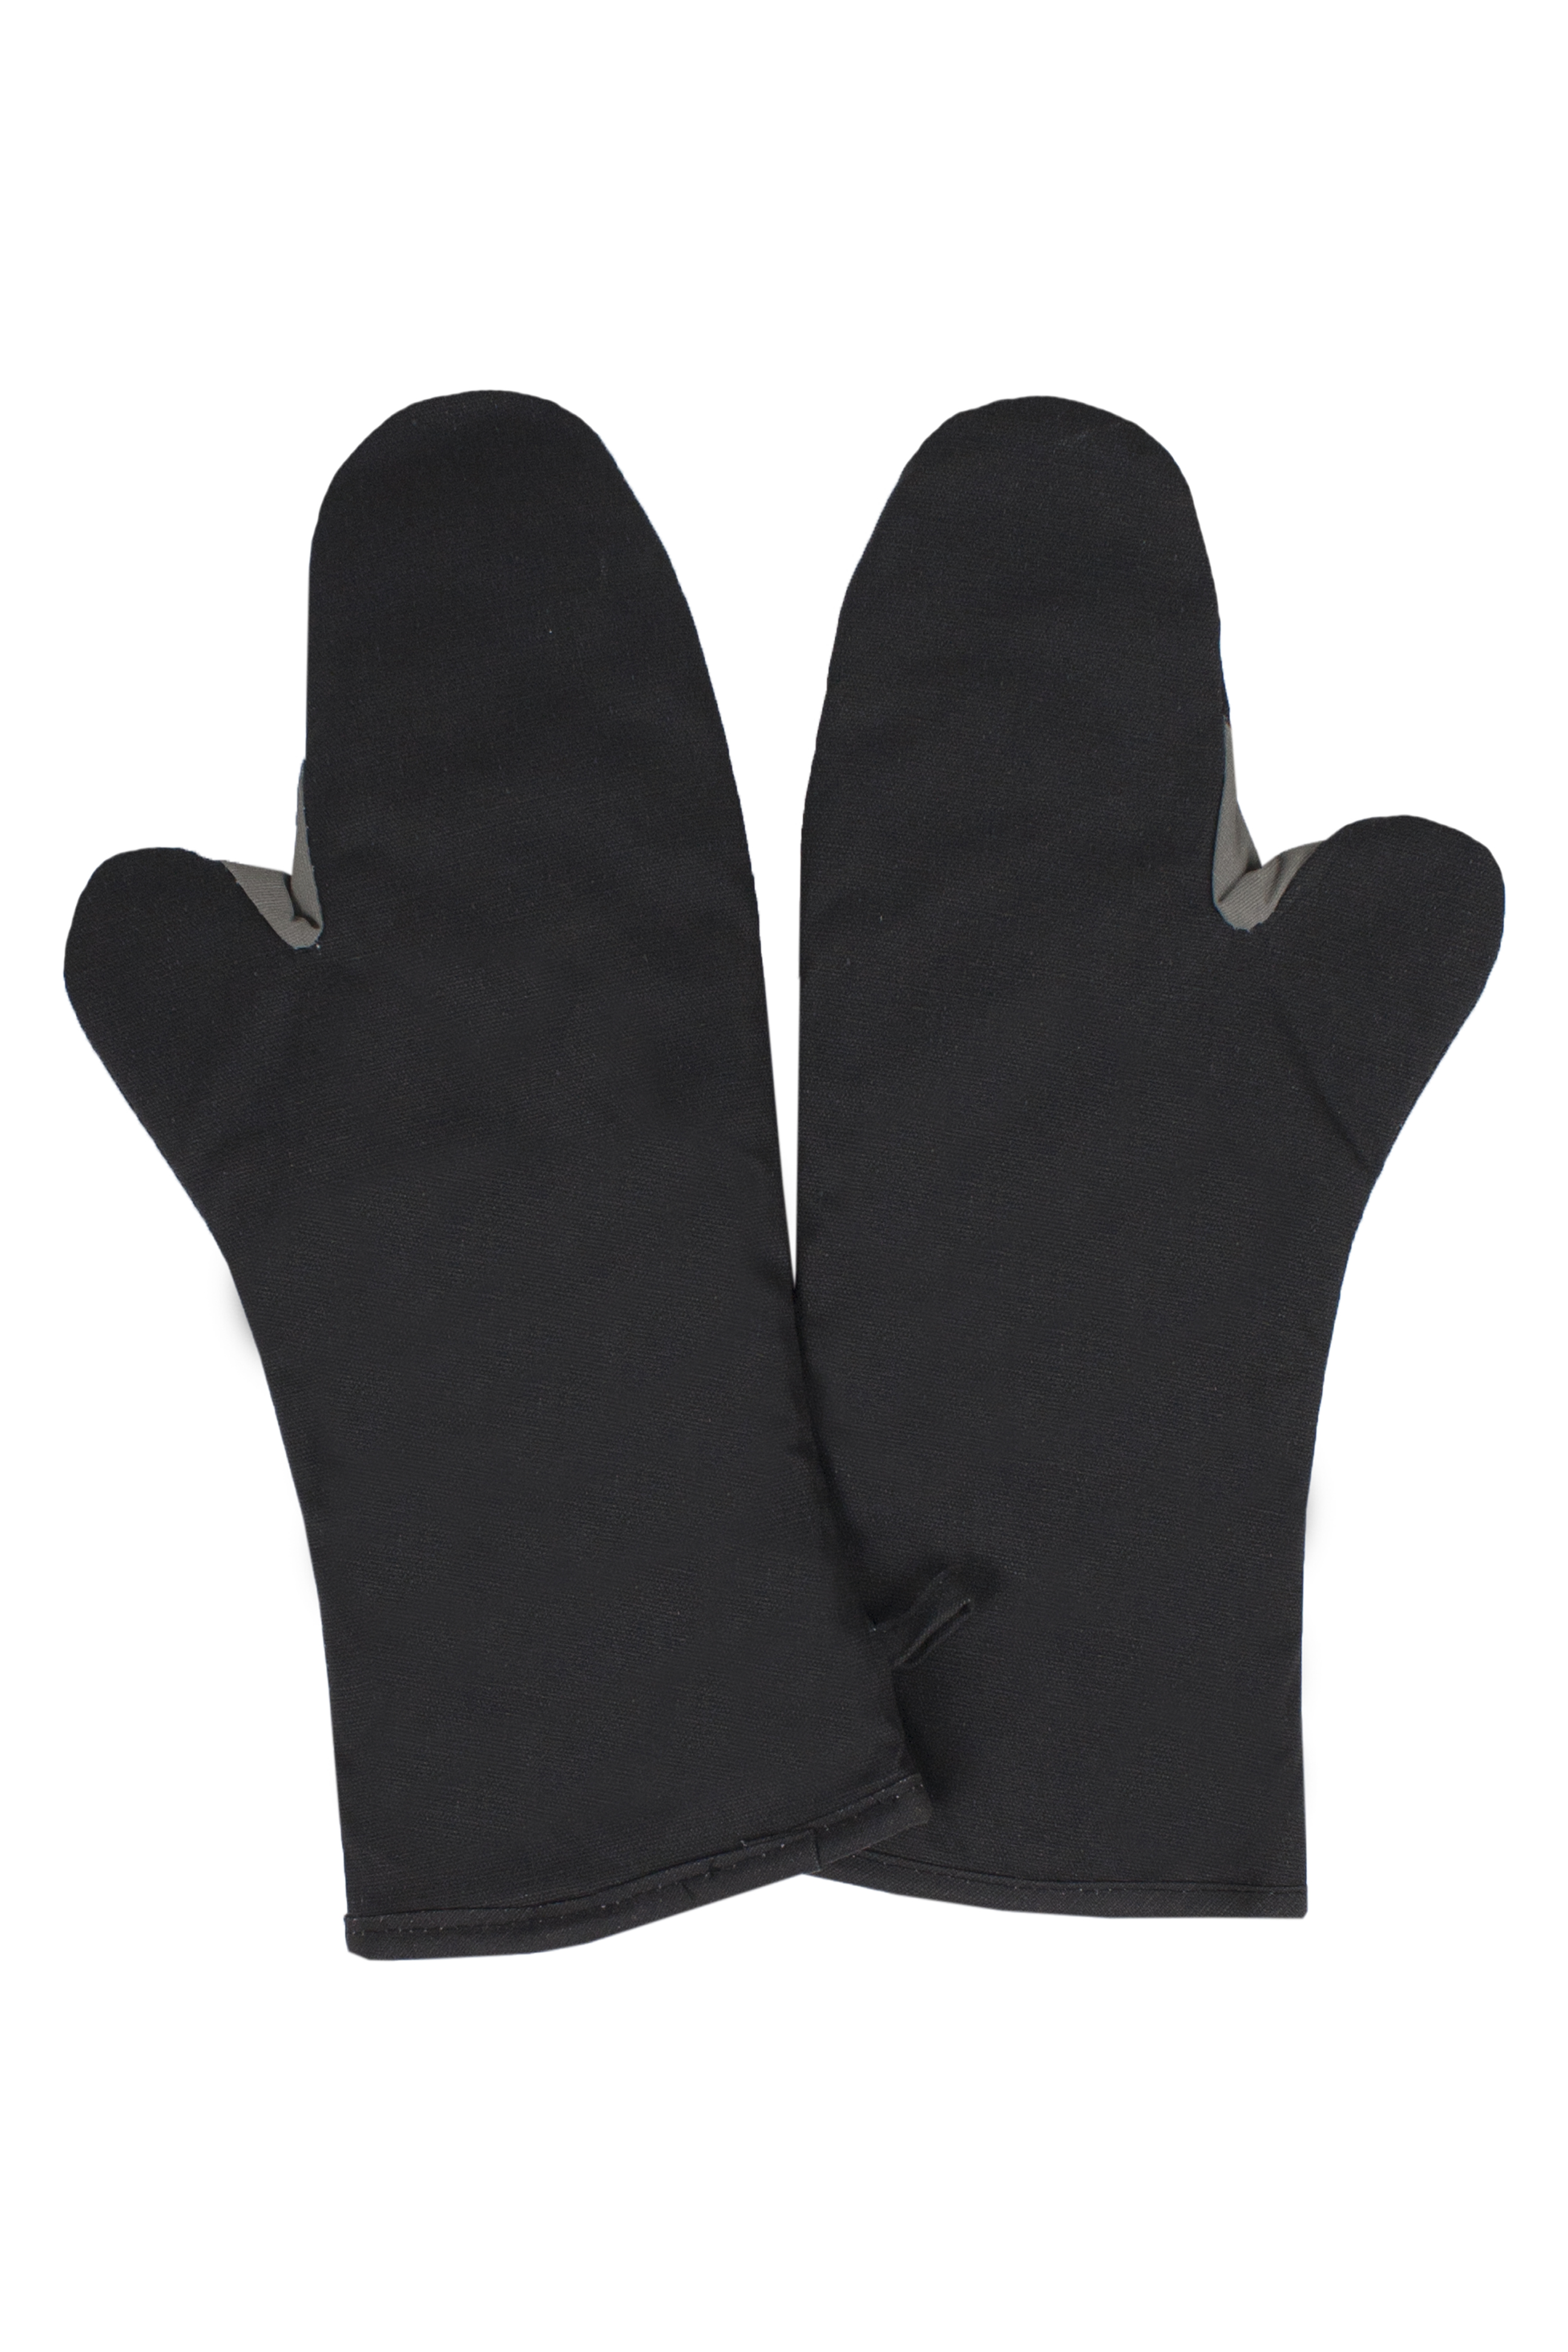 Ultra-Protective PYROTEX Oven Mitt, Elbow Length